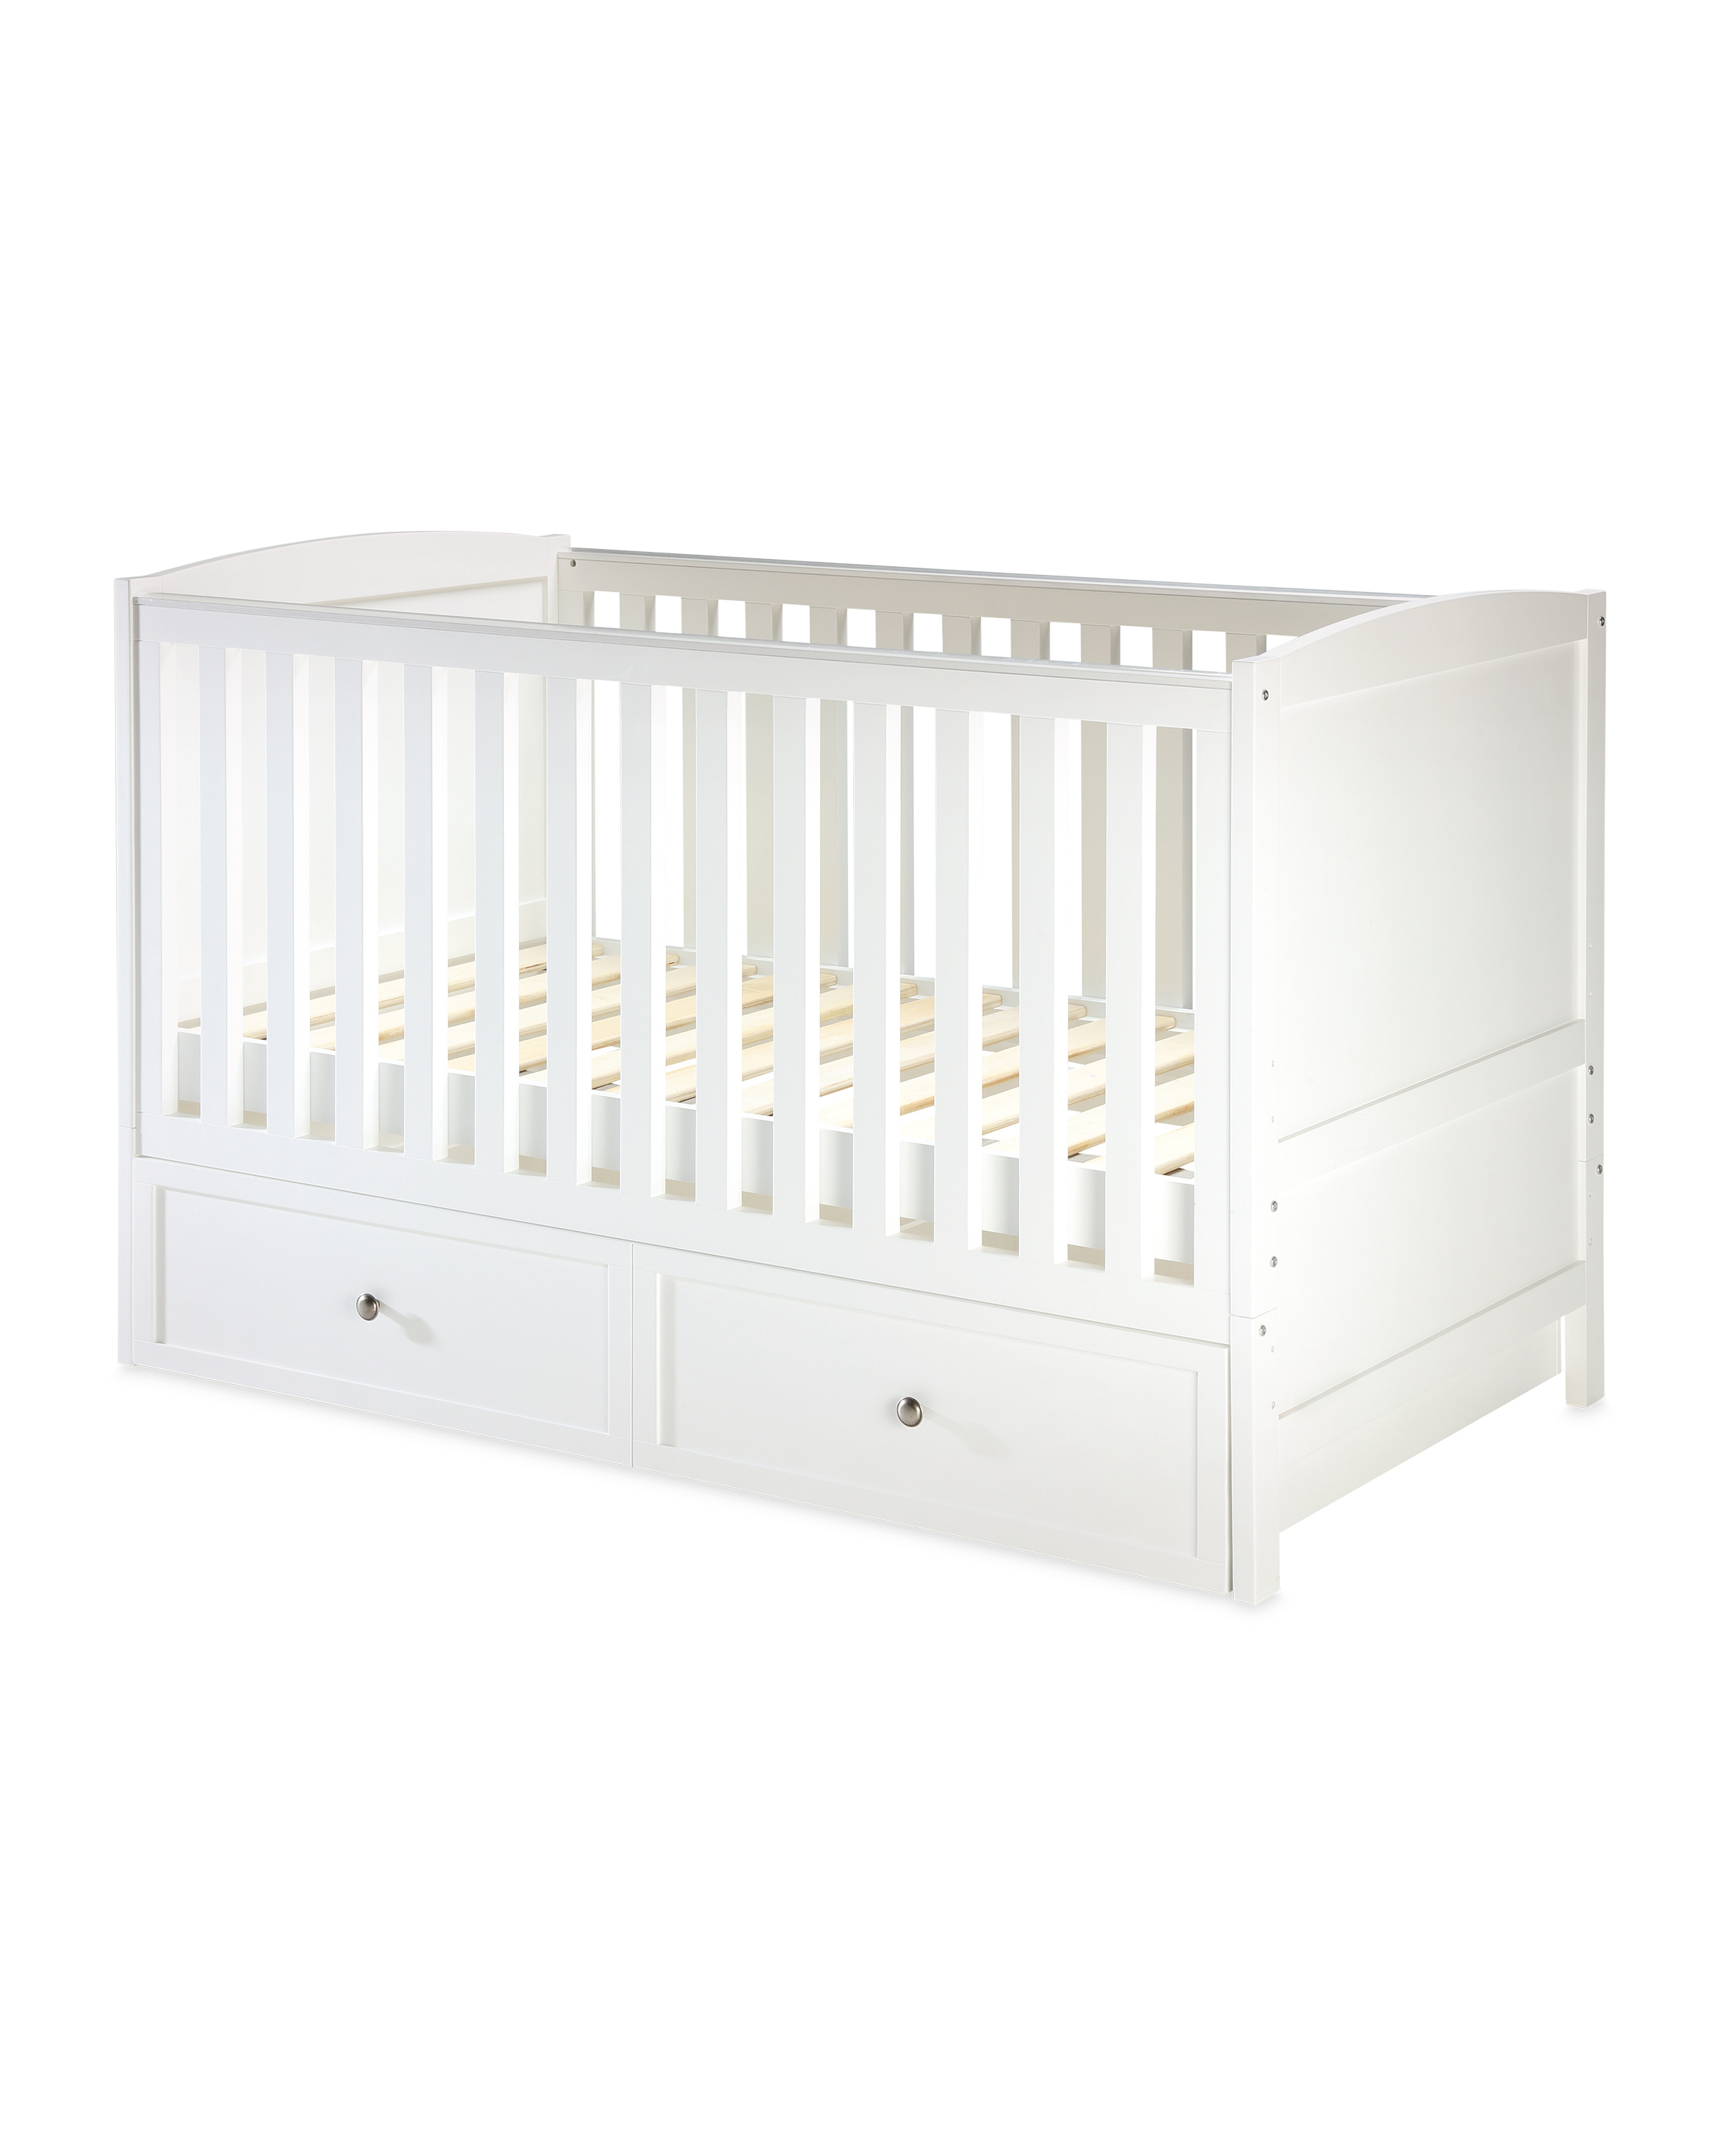 Nursery Cot Bed With Drawer Aldi Uk